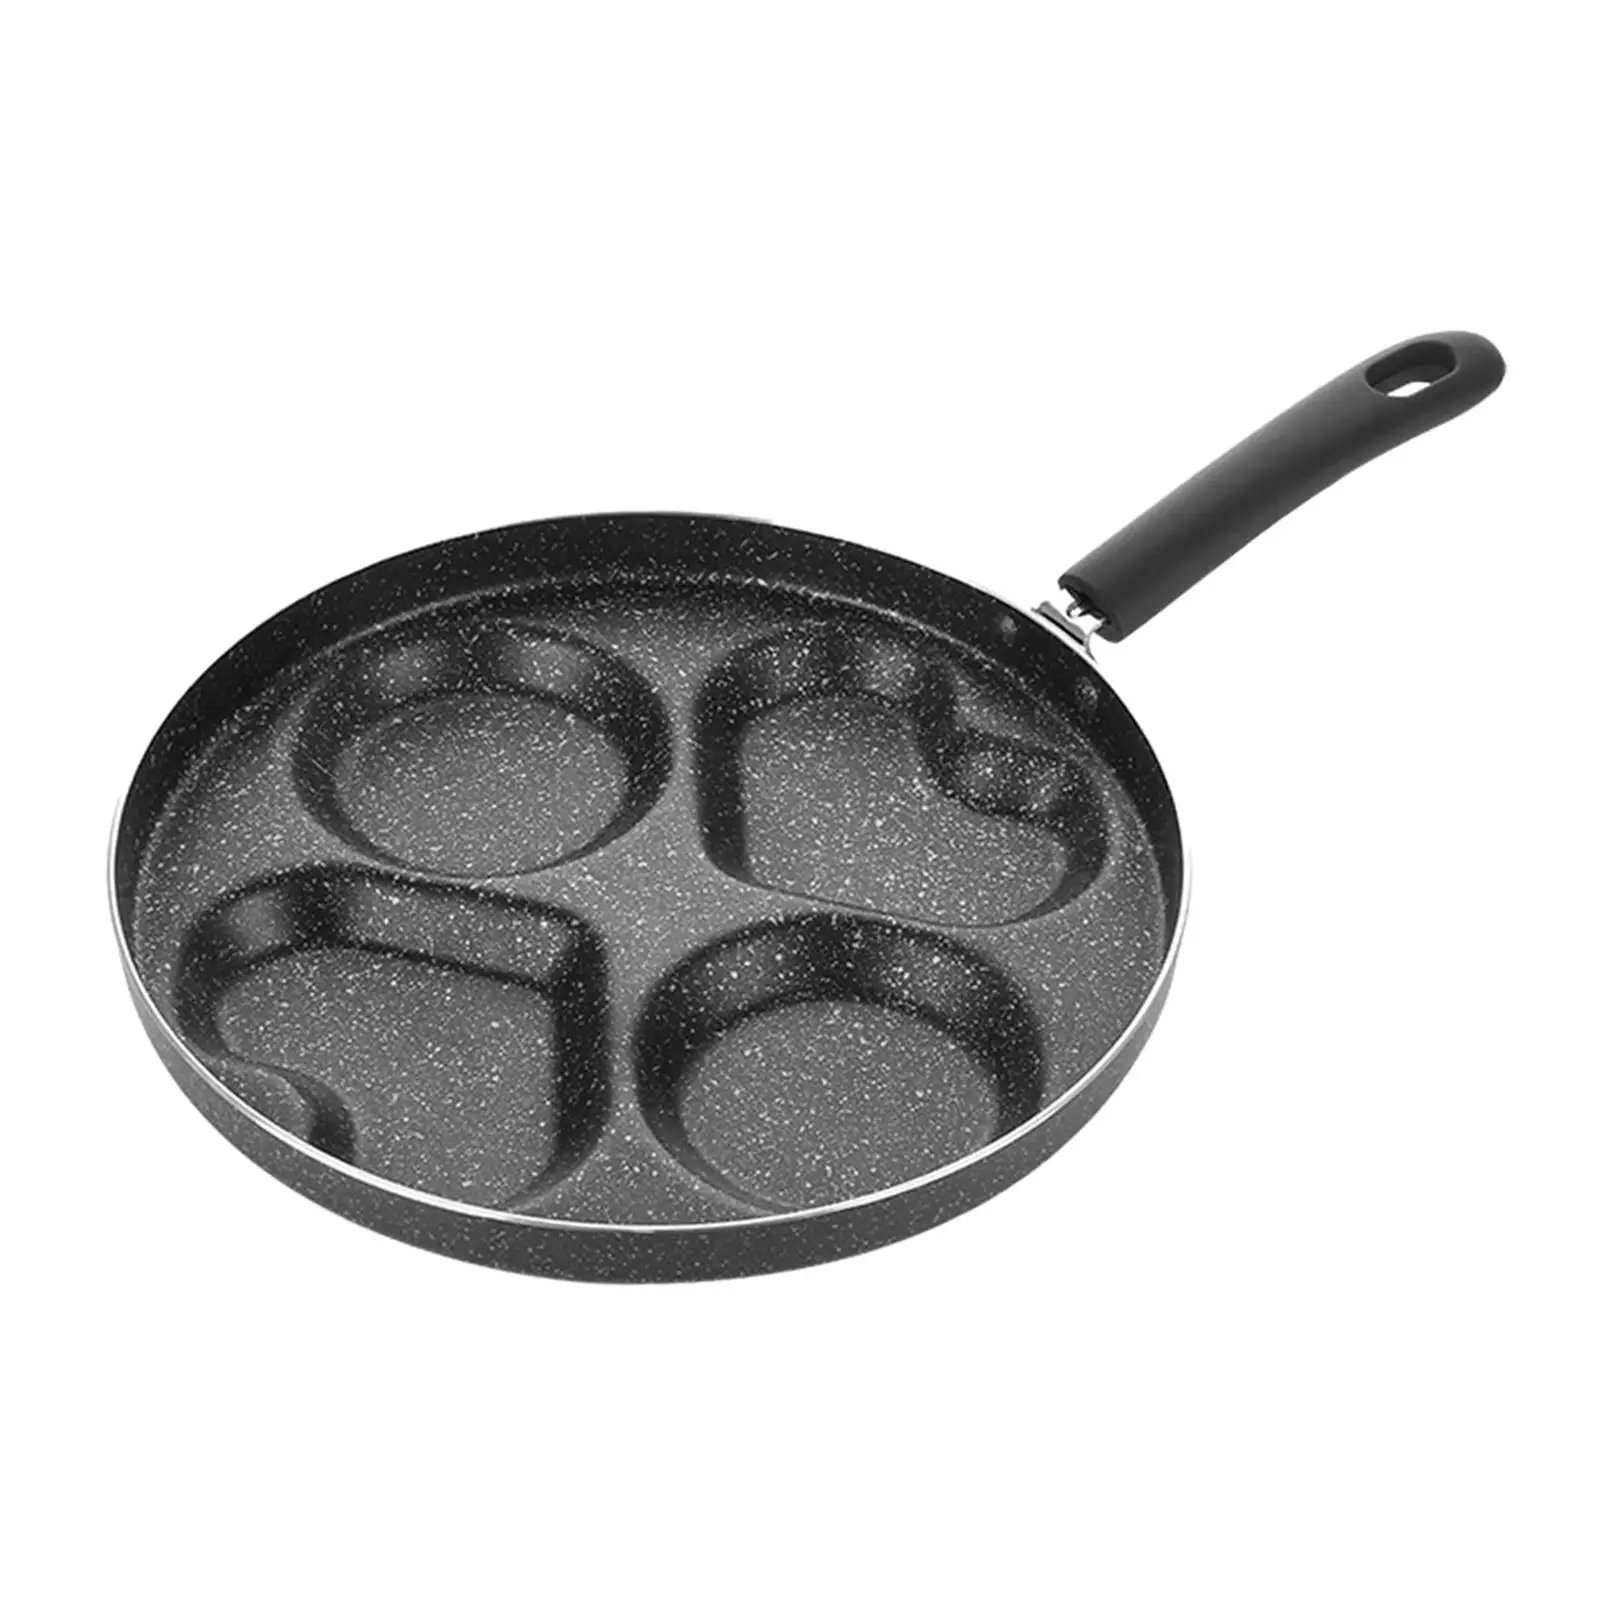 4 Cup Egg Frying Pan Cookware Omelette Pan Divided Grill Pan Burgers Eggs Pancake Maker for Restaurants Household Kitchen Hotel